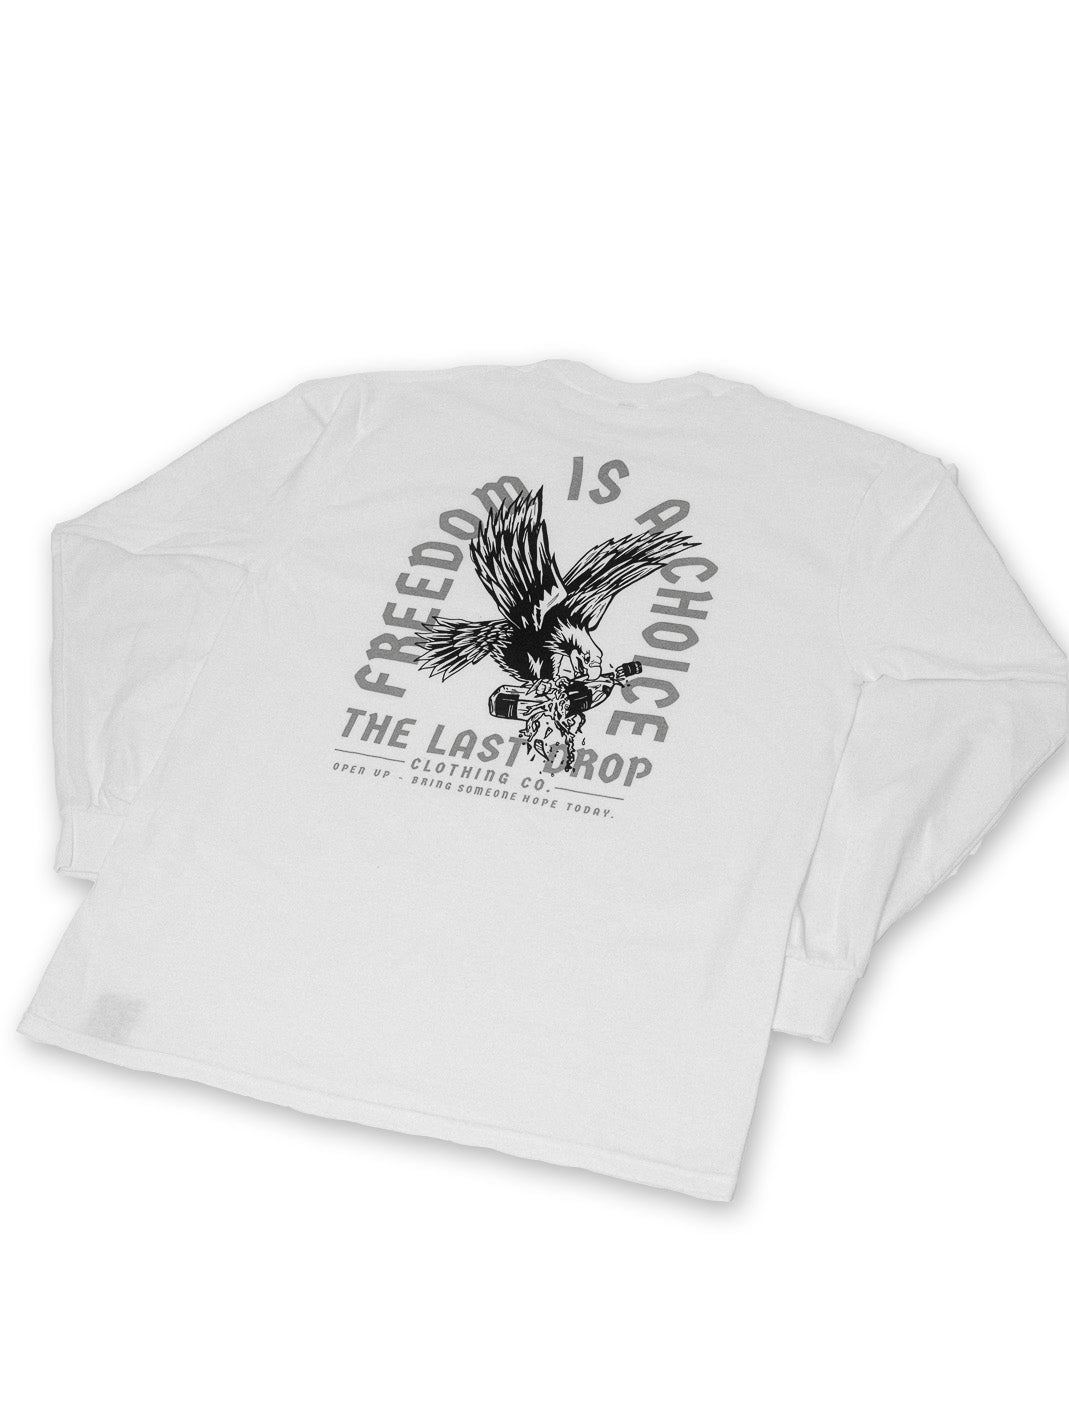 This soft, breathable white long sleeve t-shirt features a screen-printed tattoo eagle design on quality cotton fabric.